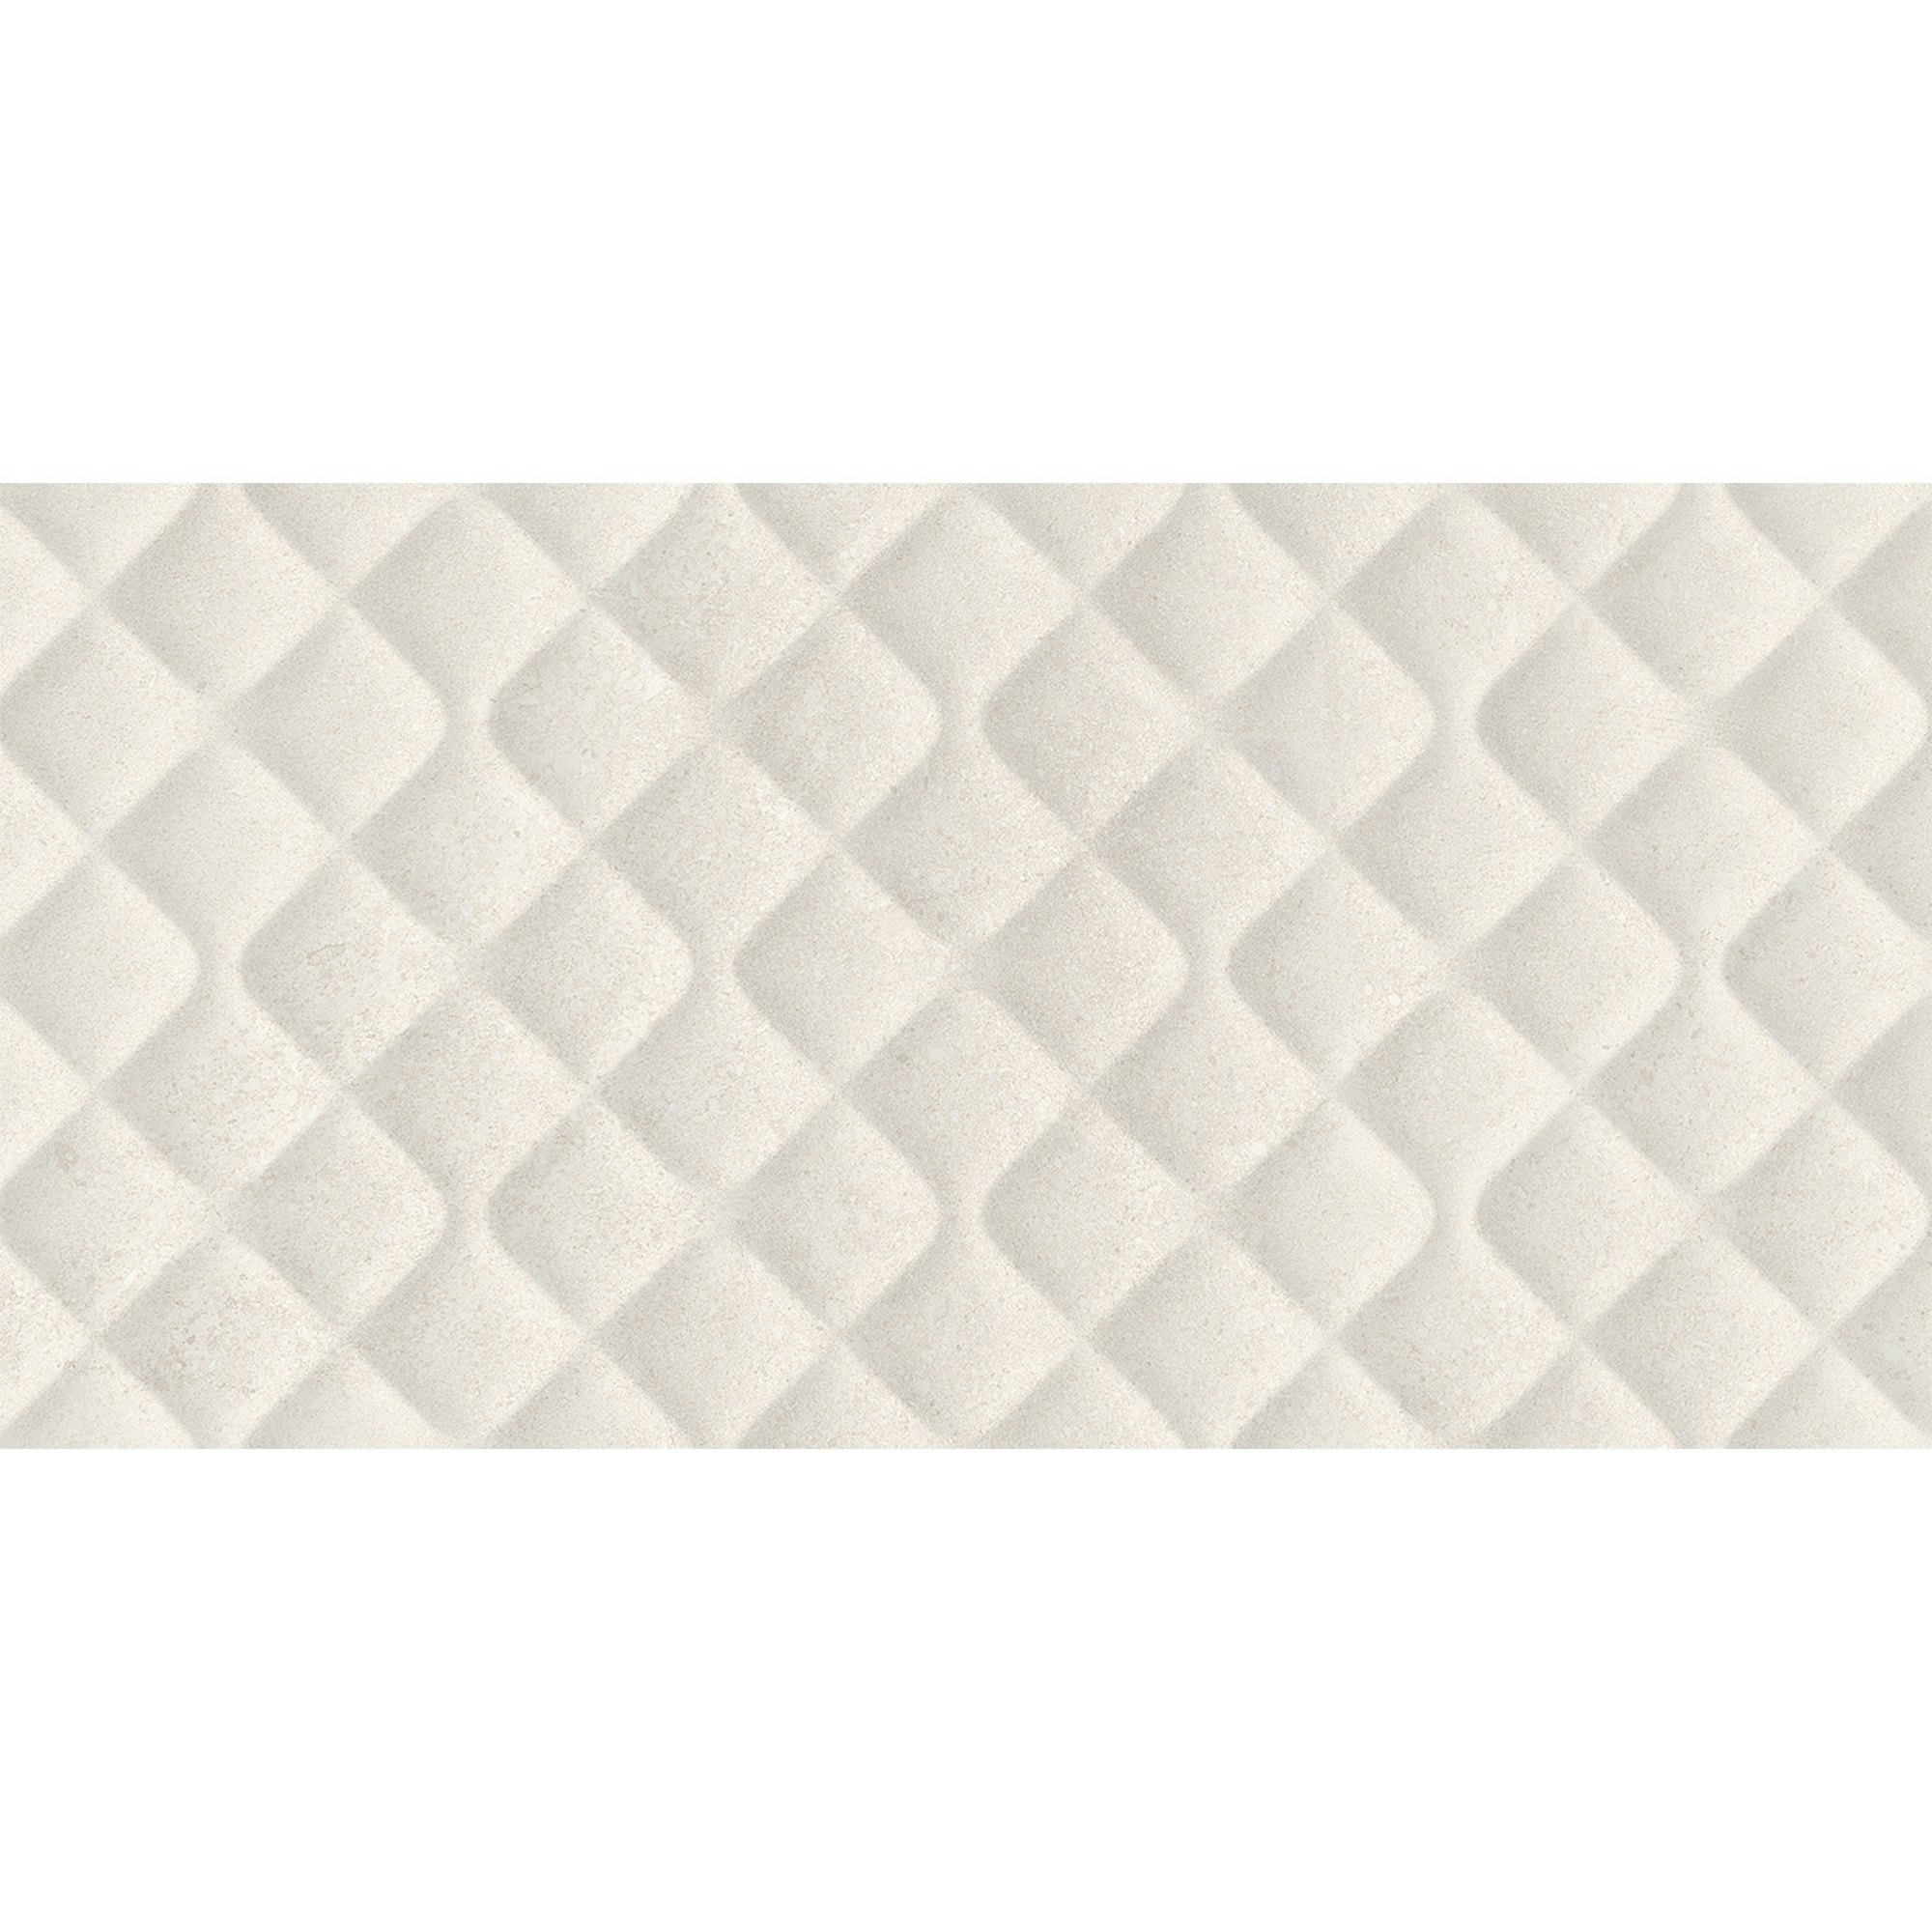 Fontwell Sand Textured Decor Tile